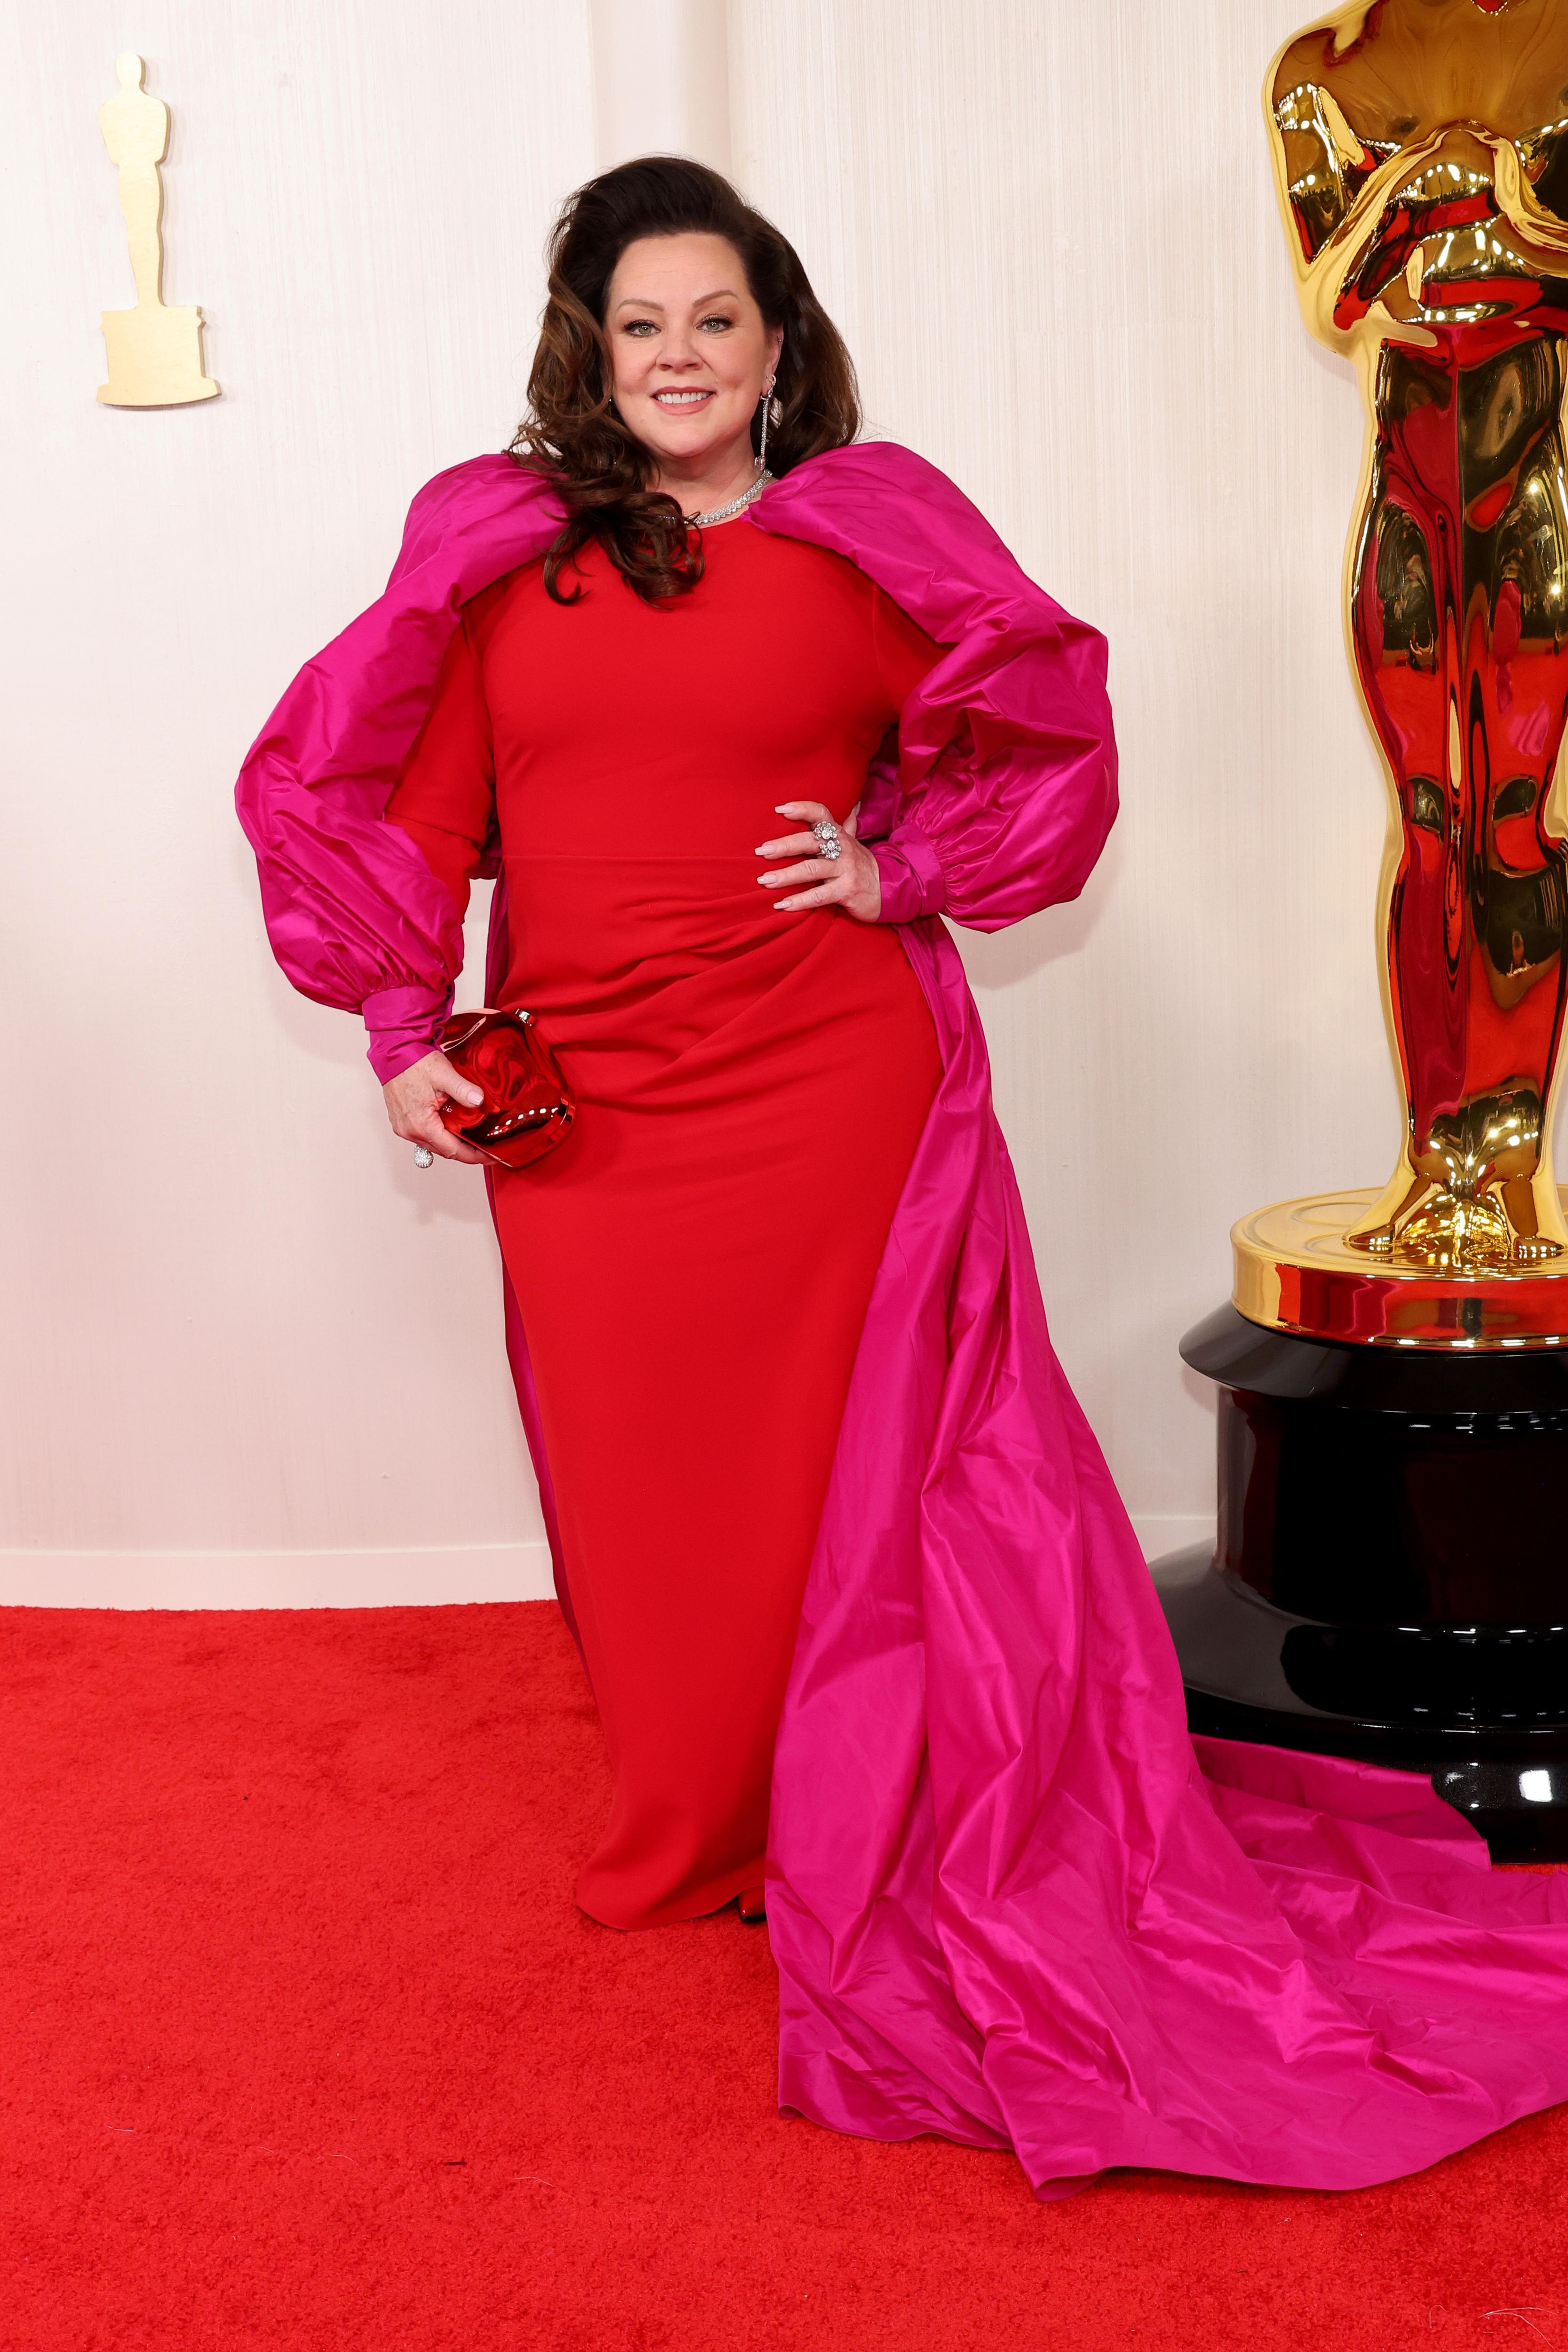 Melissa McCarthy in a red and pink dress on the Oscars red carpet